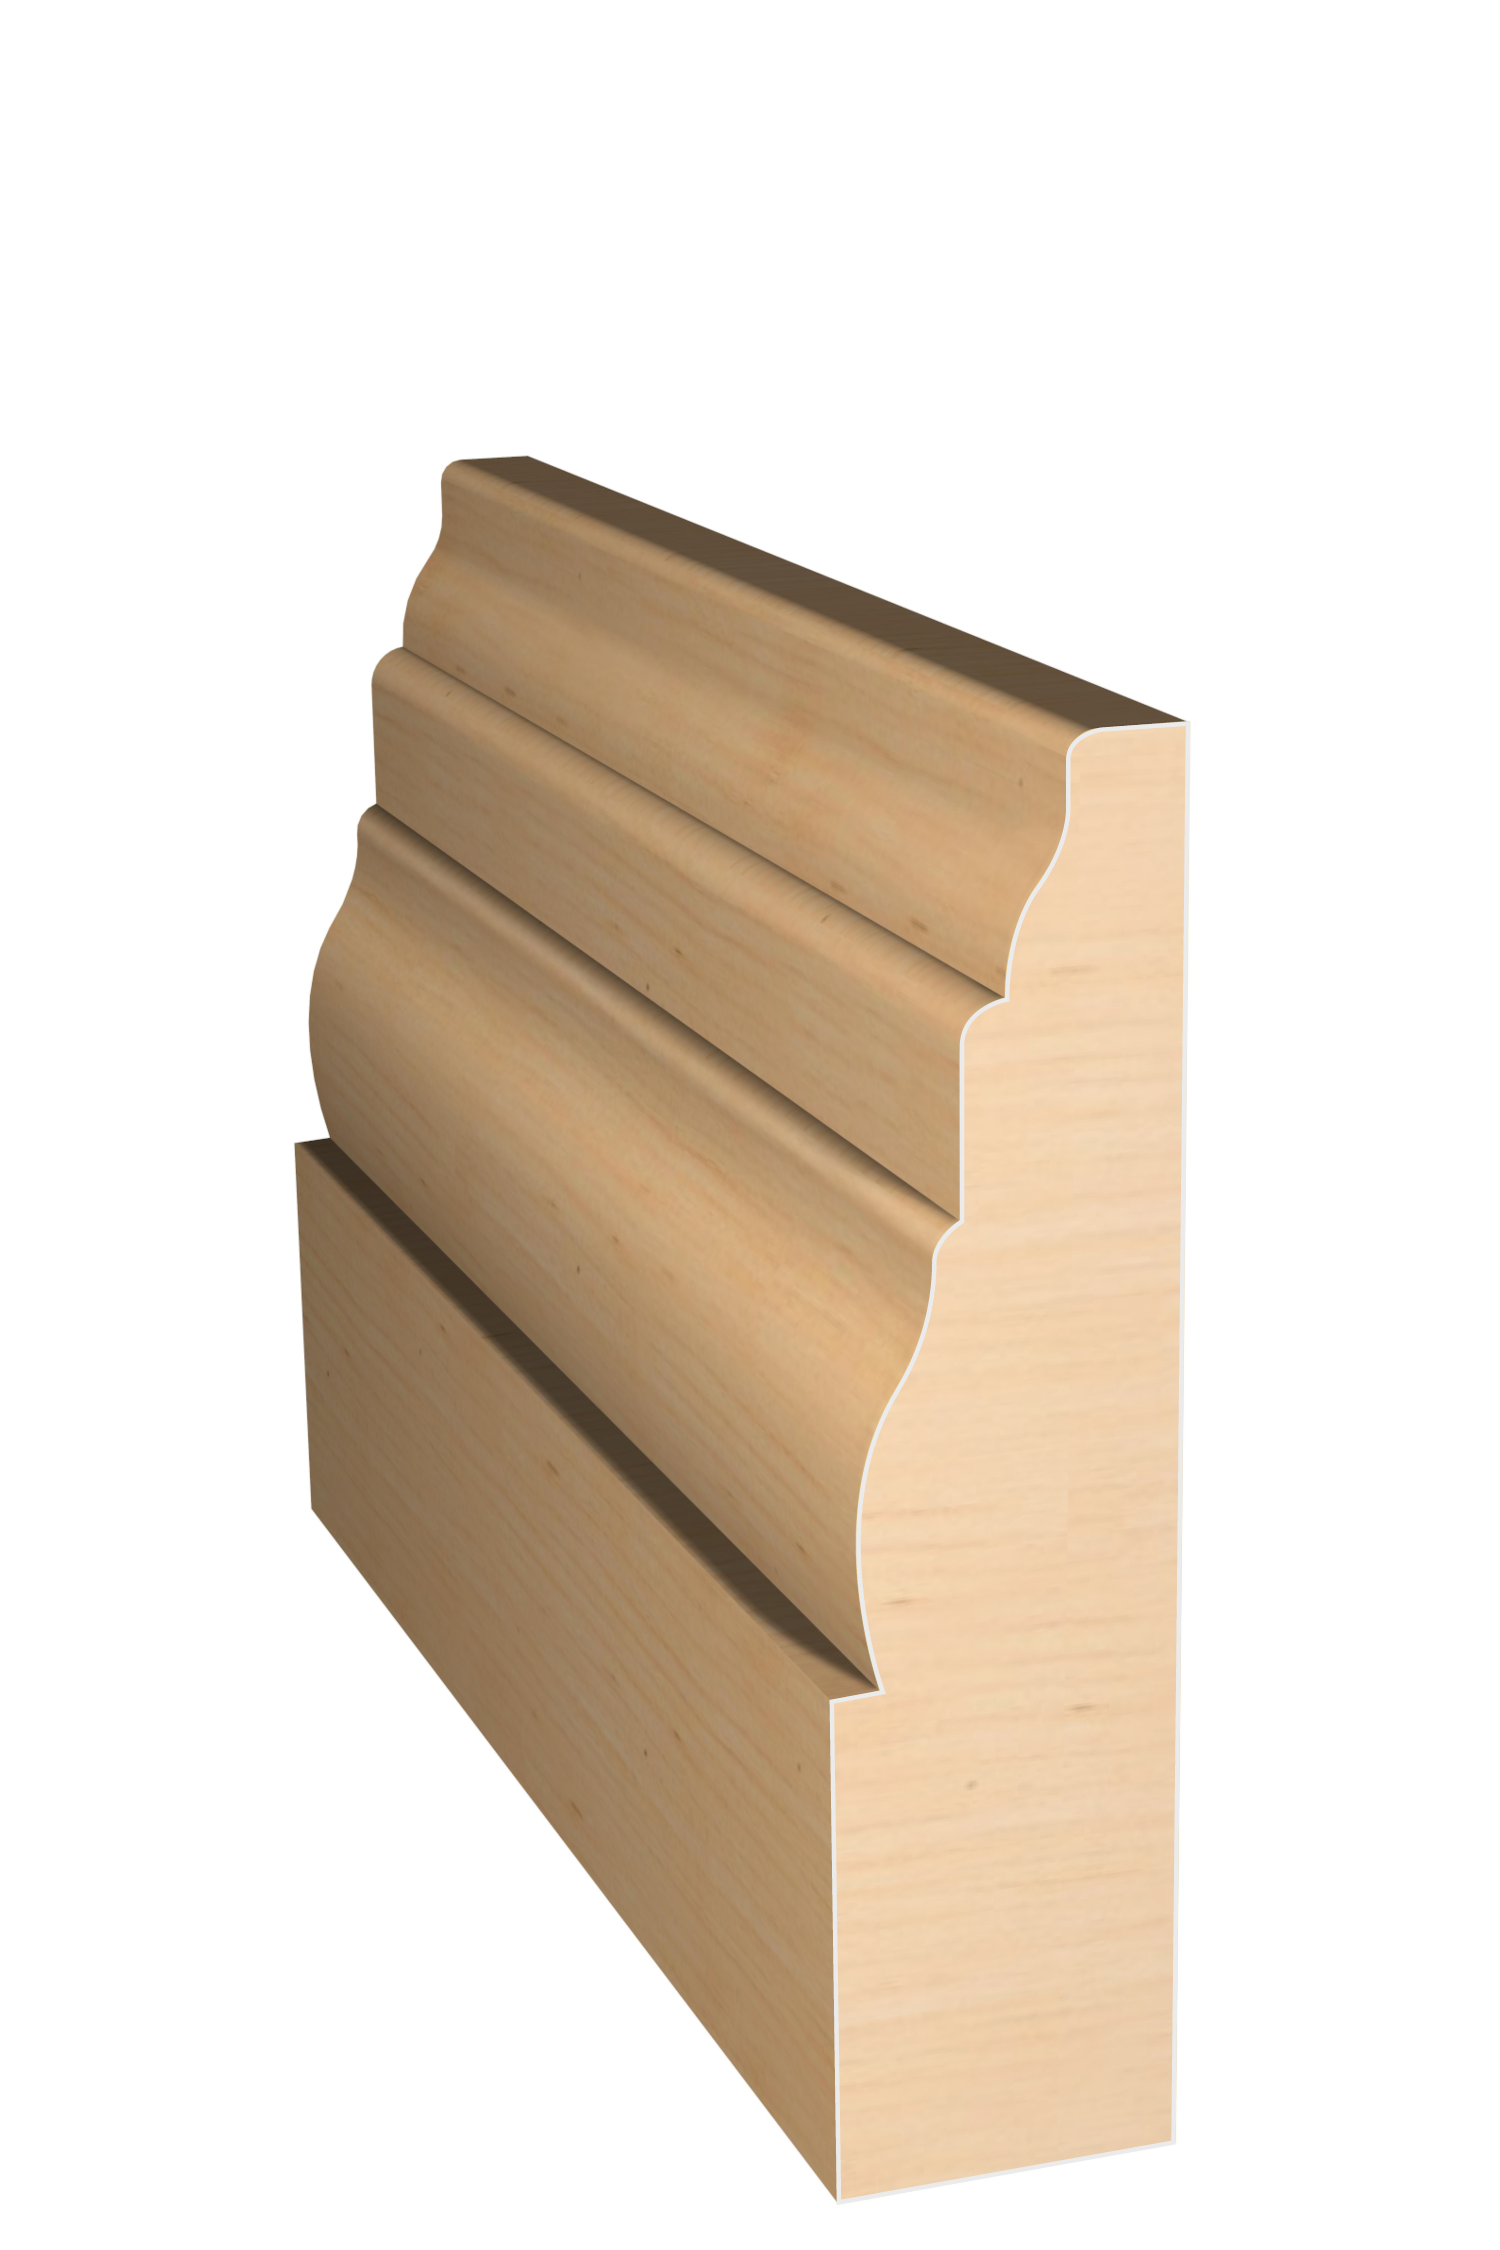 Three dimensional rendering of custom base wood molding BAPL48 made by Public Lumber Company in Detroit.